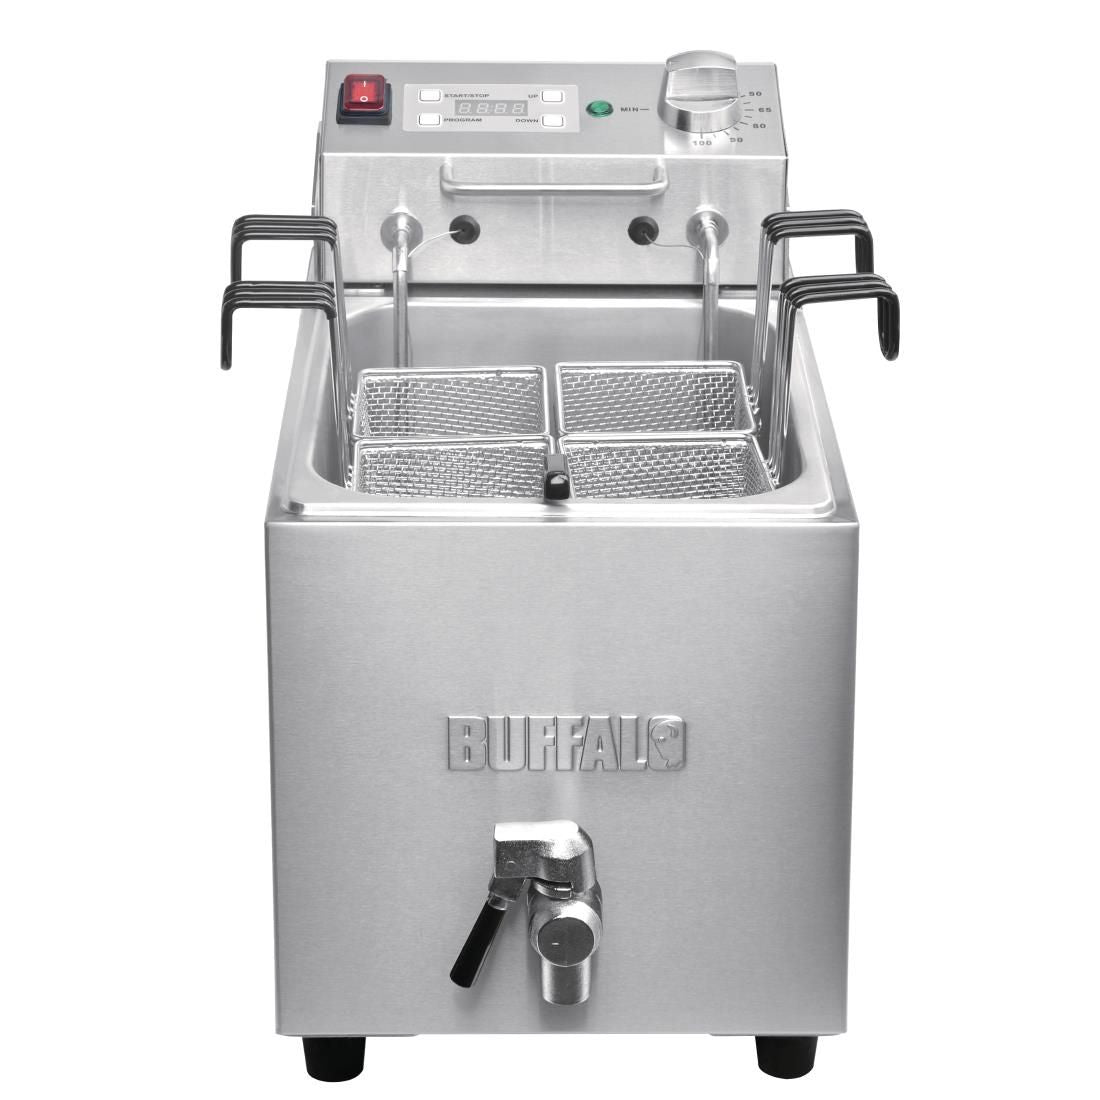 DB191 Buffalo Pasta Cooker 8Ltr with Tap and Timer JD Catering Equipment Solutions Ltd